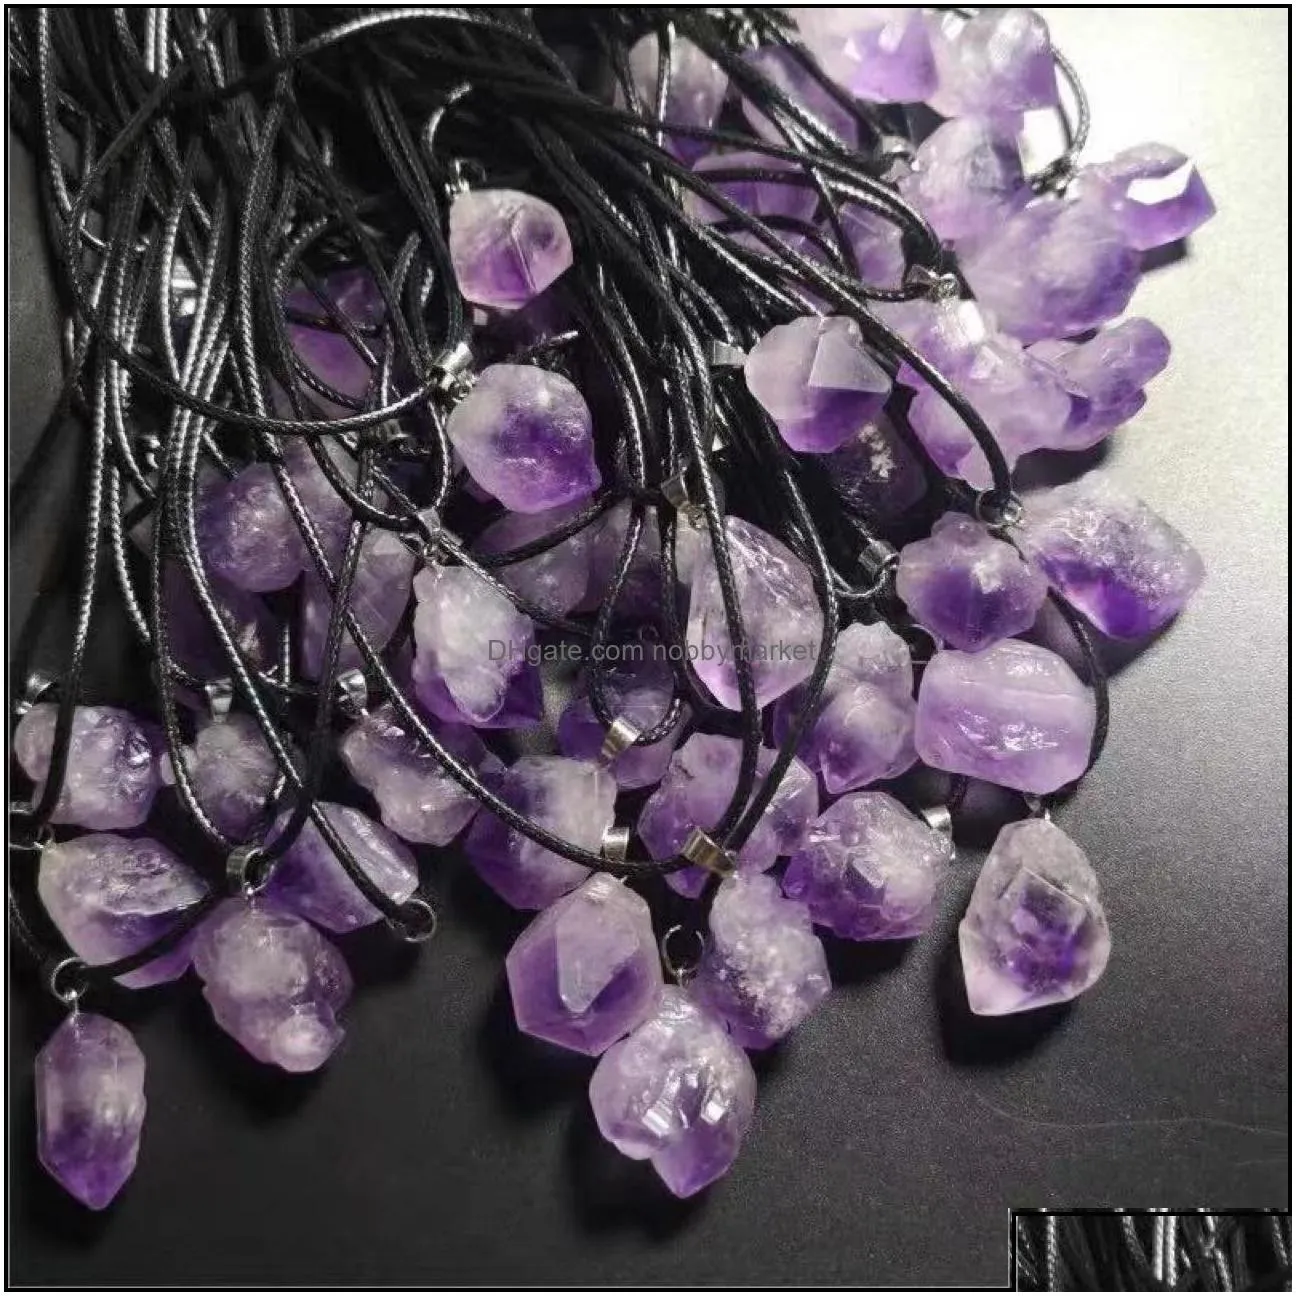 Natural Amethyst Rough Stone Crystal Pendant Necklace Energy Stones Healing Meditation Yoga Gift Wholesale Drop Delivery 2021 Necklaces